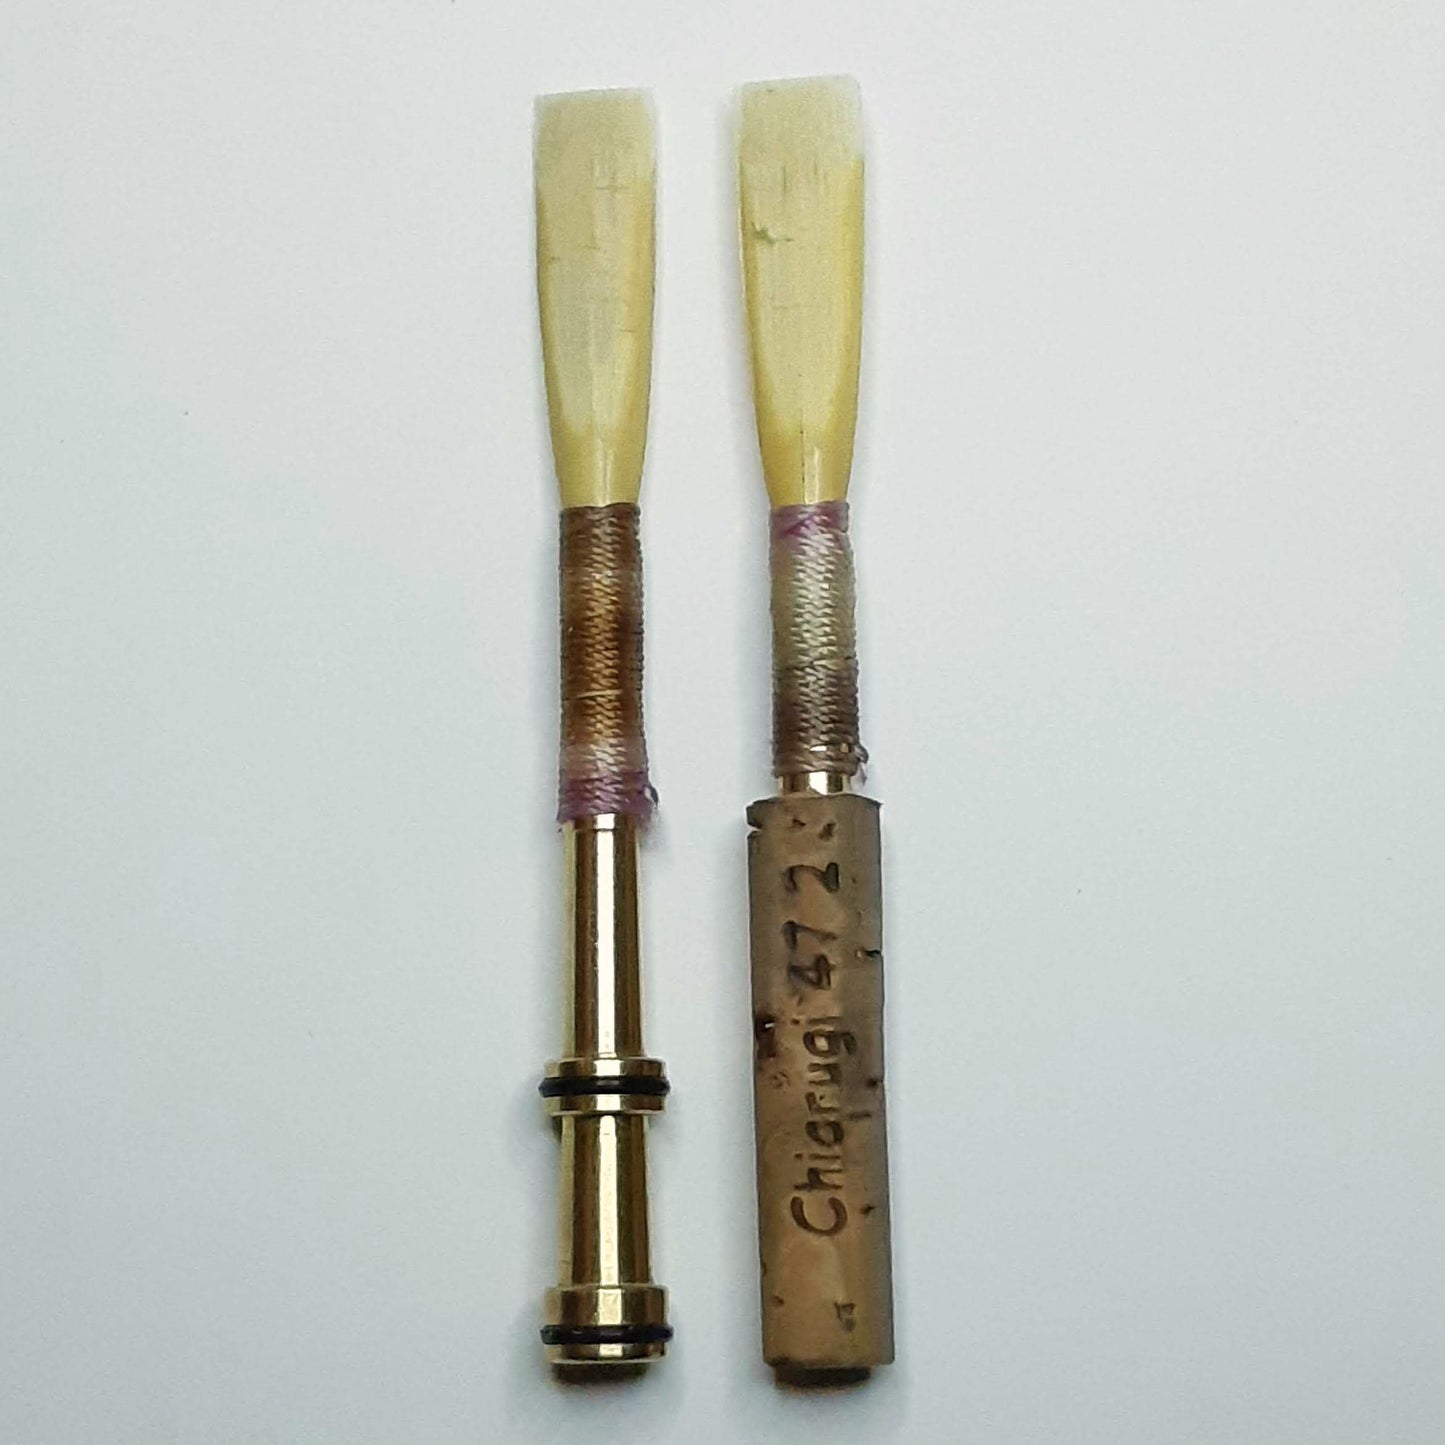 New Product: Angle Guides for Knife Sharpening. – Dan Waldron Oboe